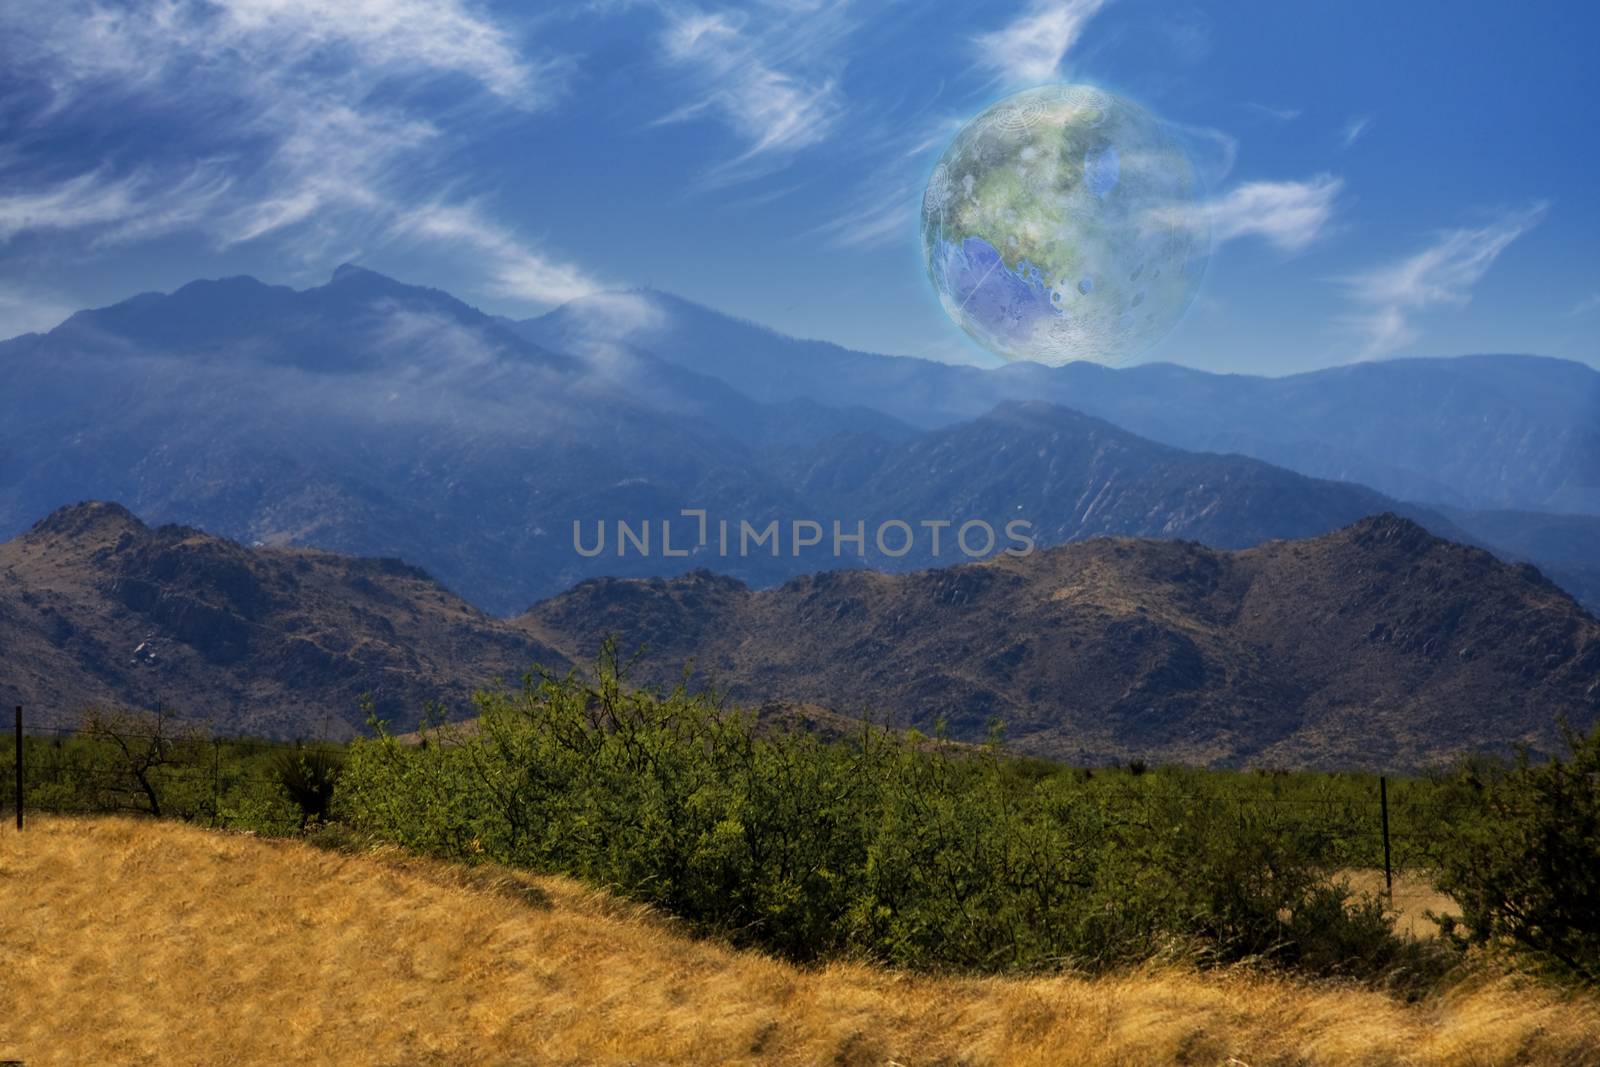 Terraformed Moon. View from the Earth by applesstock